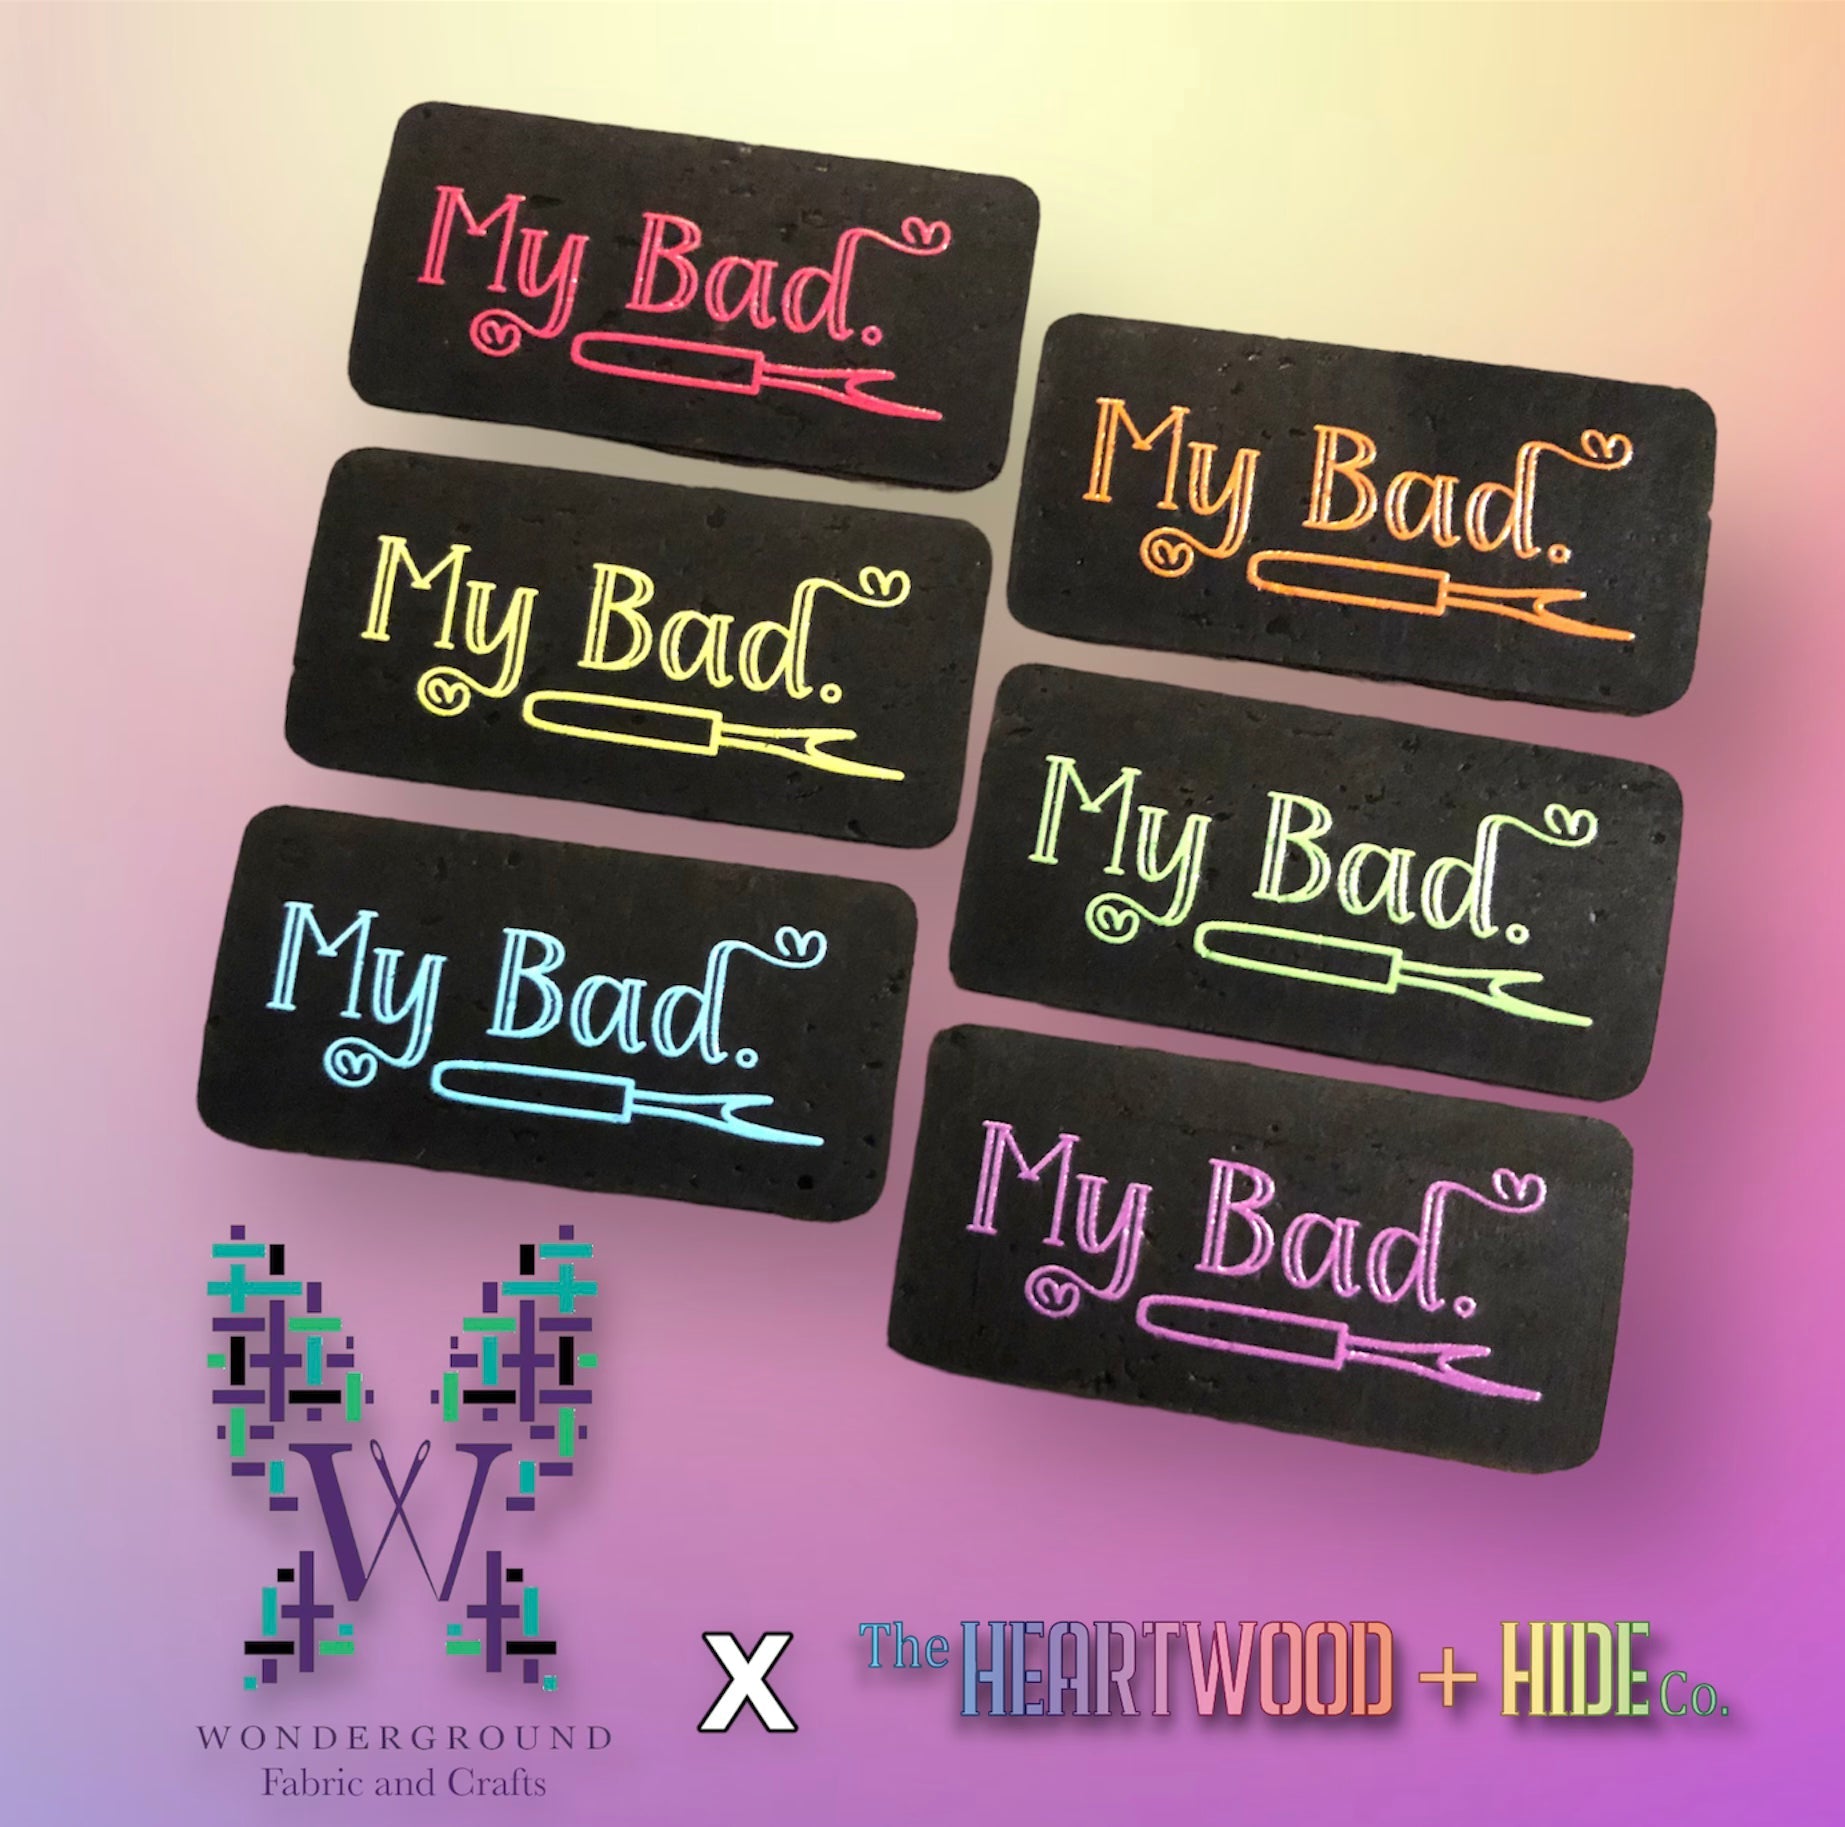 “My Bad” Bag Tags by Heartwood and Hide